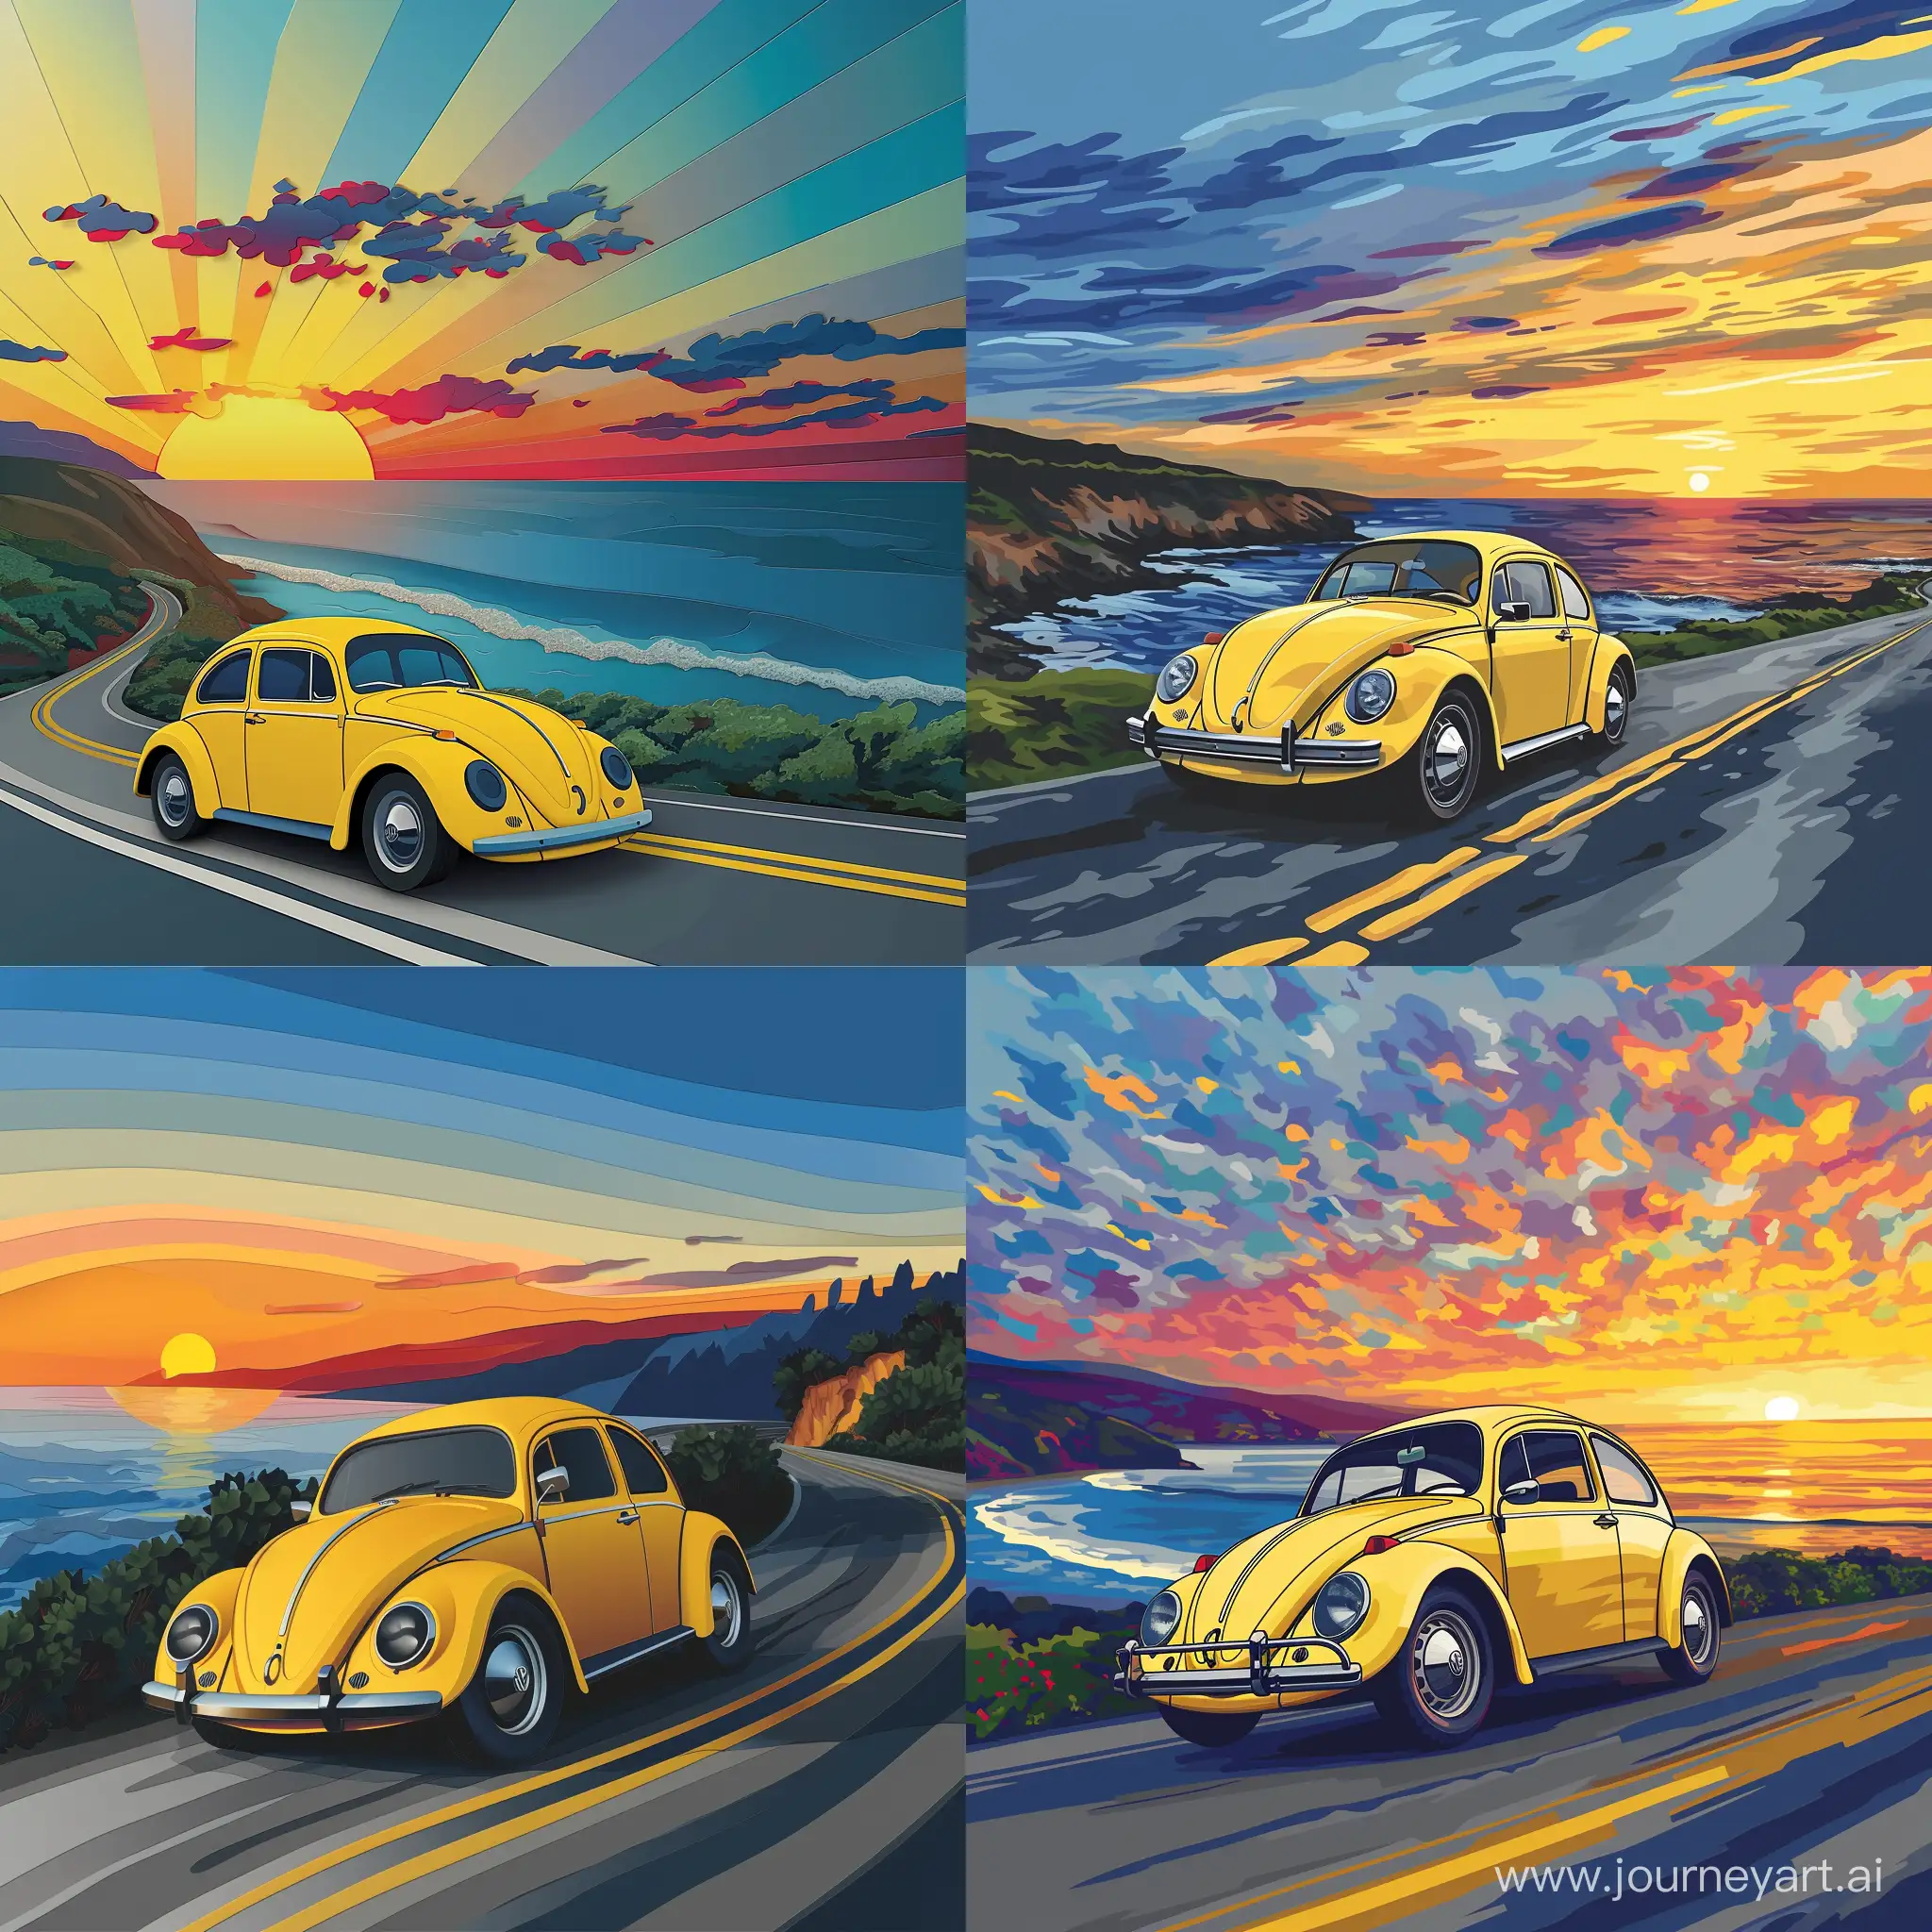 Cut paper art of a yellow Volkswagen beetle traveling on the road by the sea, sunset behind, in high quality vector style